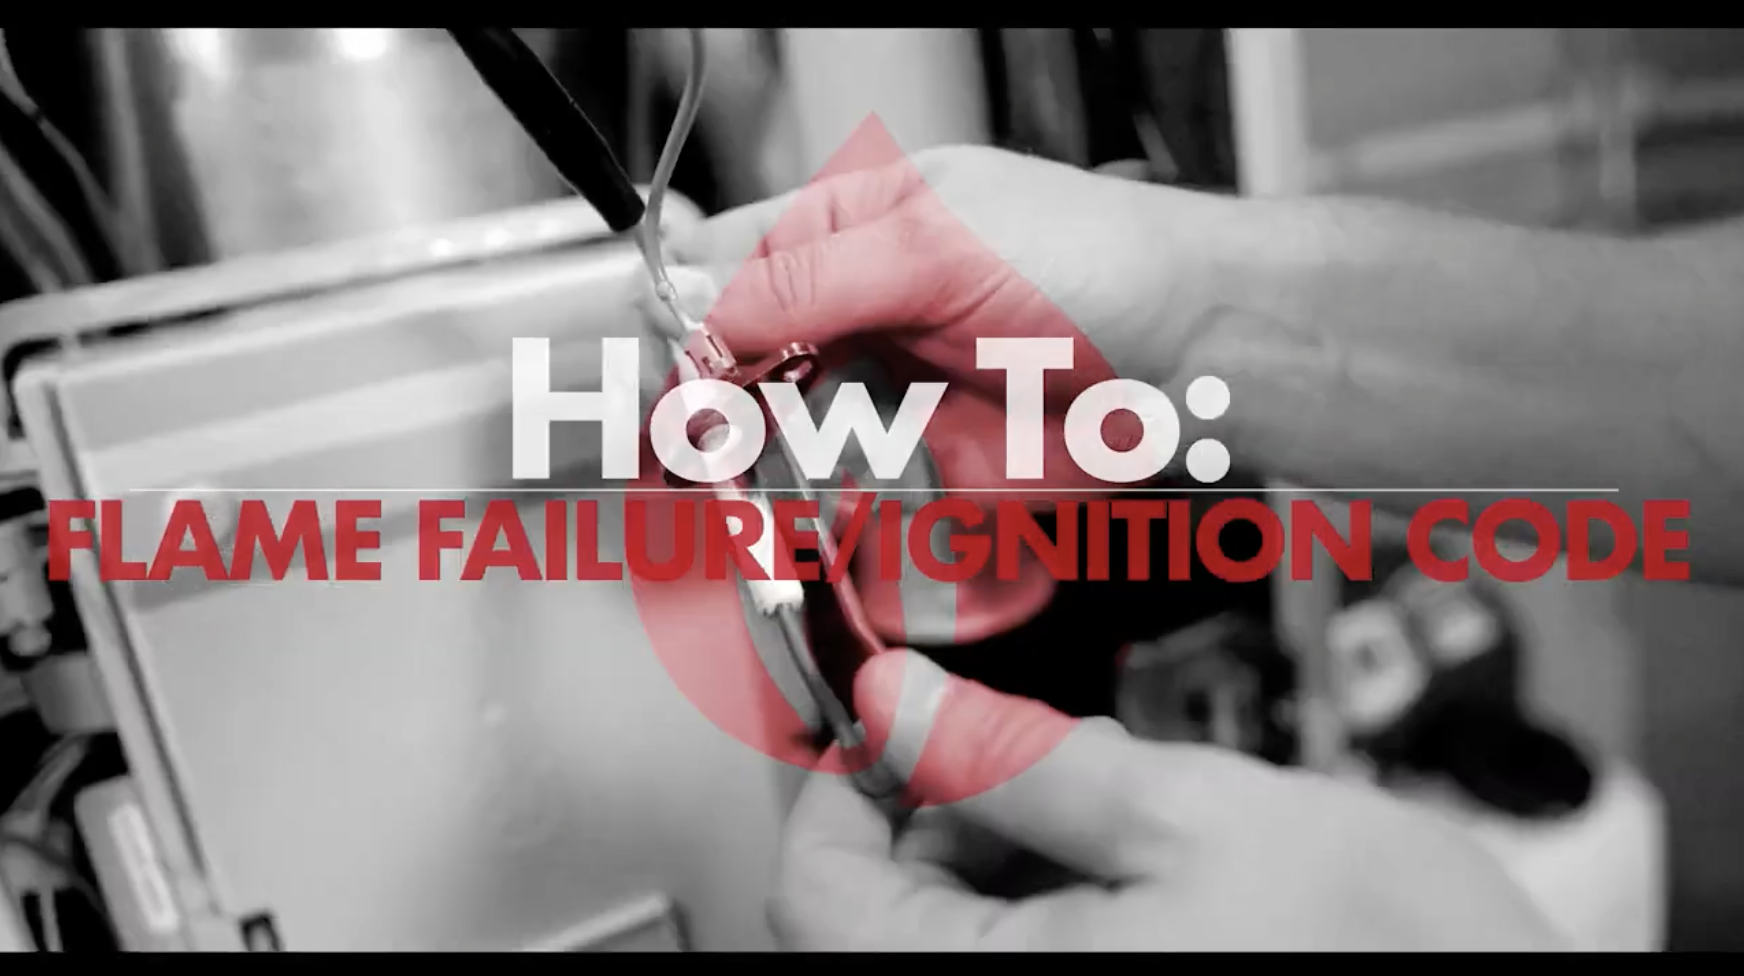 How To: Flame Failure/Ignition Code